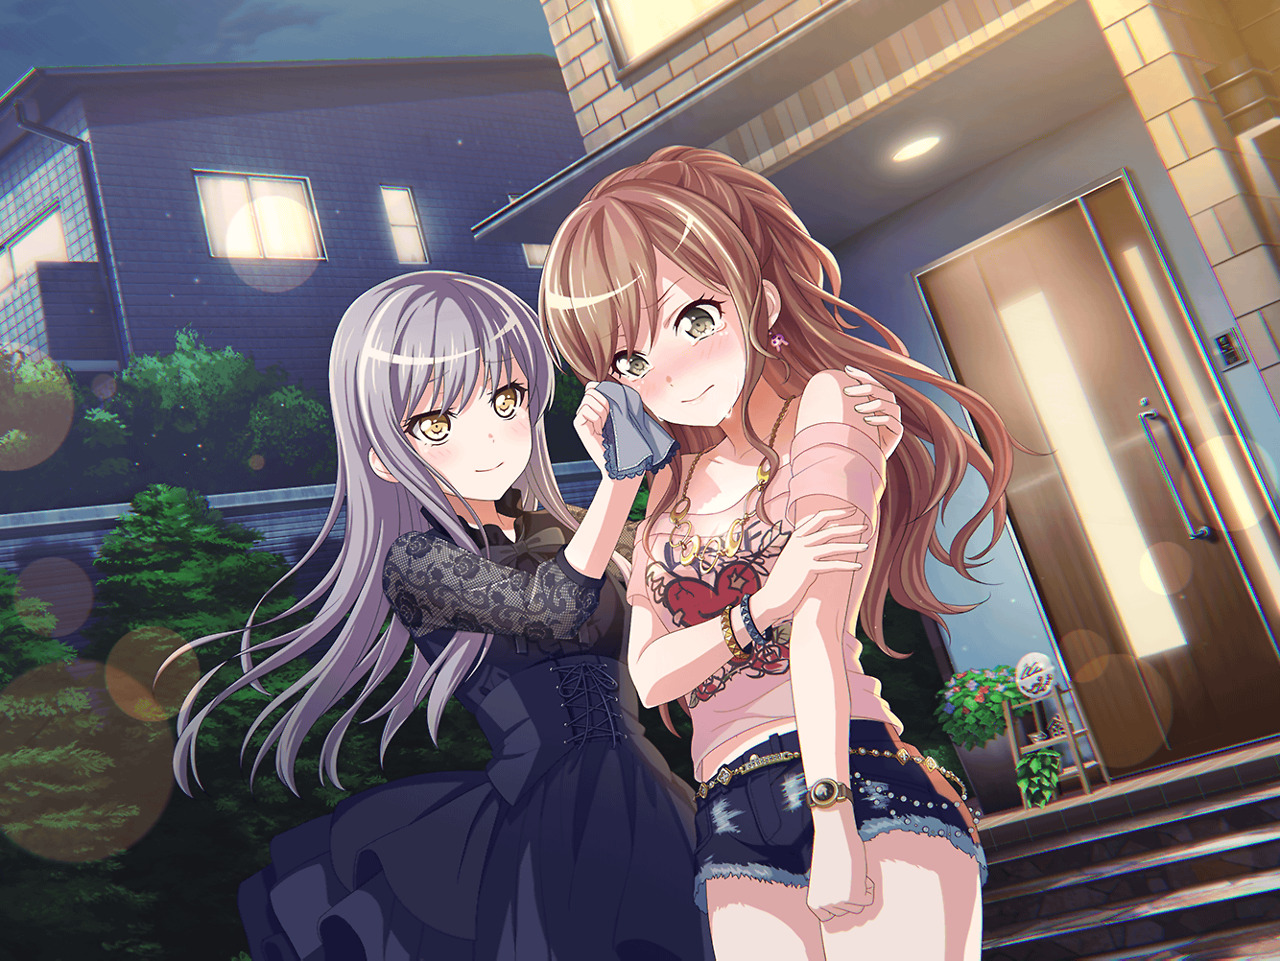 New Upcoming Cards from the SparkRiNG Sparkle event. : r/BanGDream